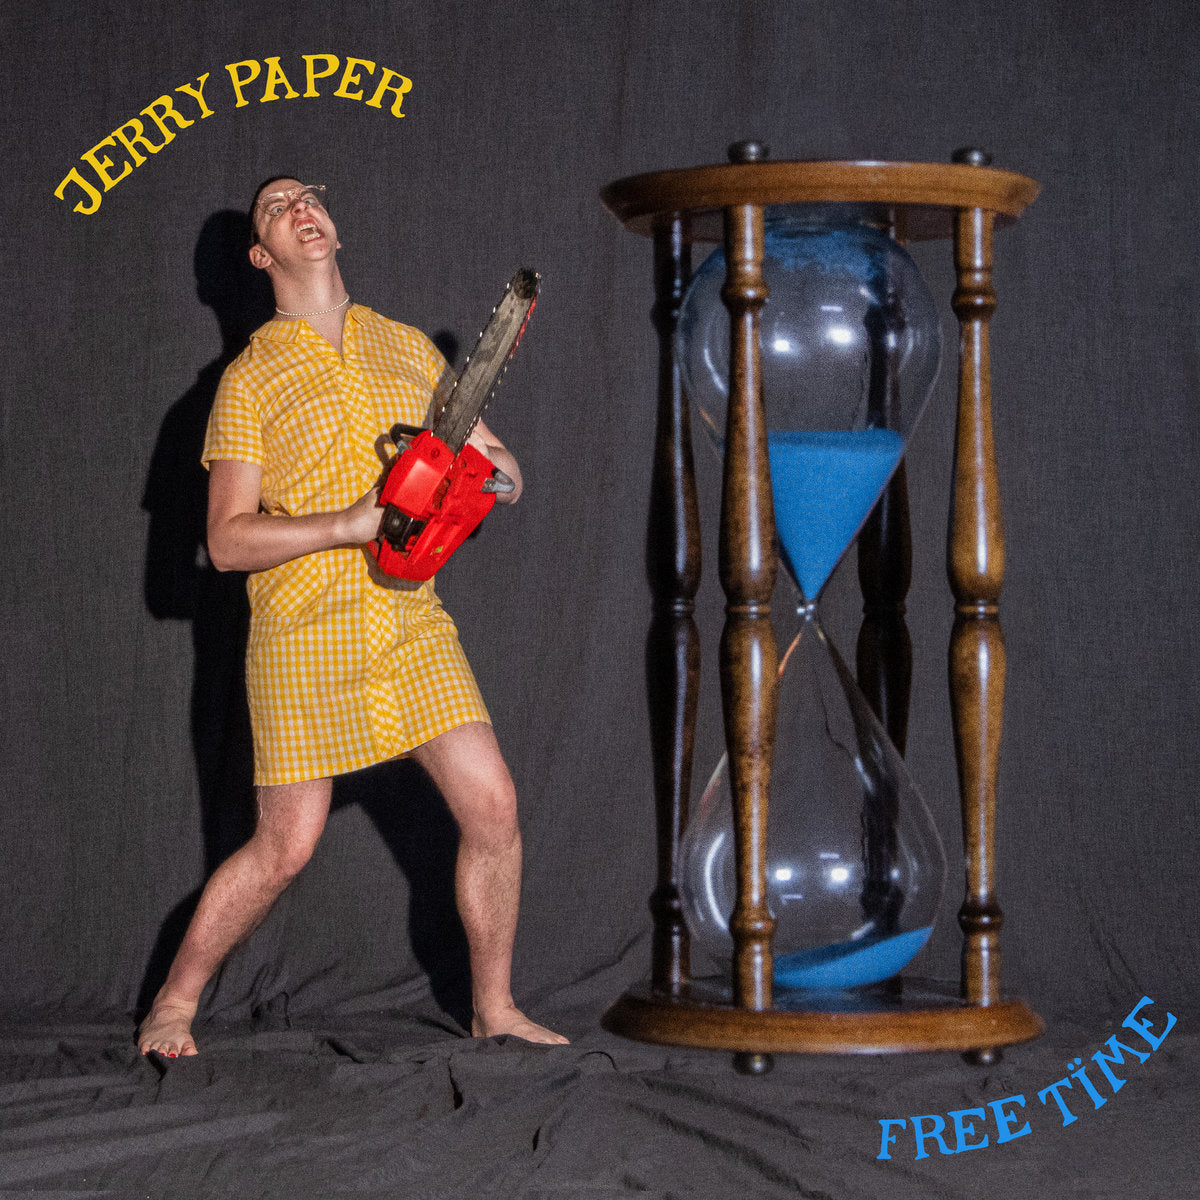 JERRY PAPER 'FREE TIME'